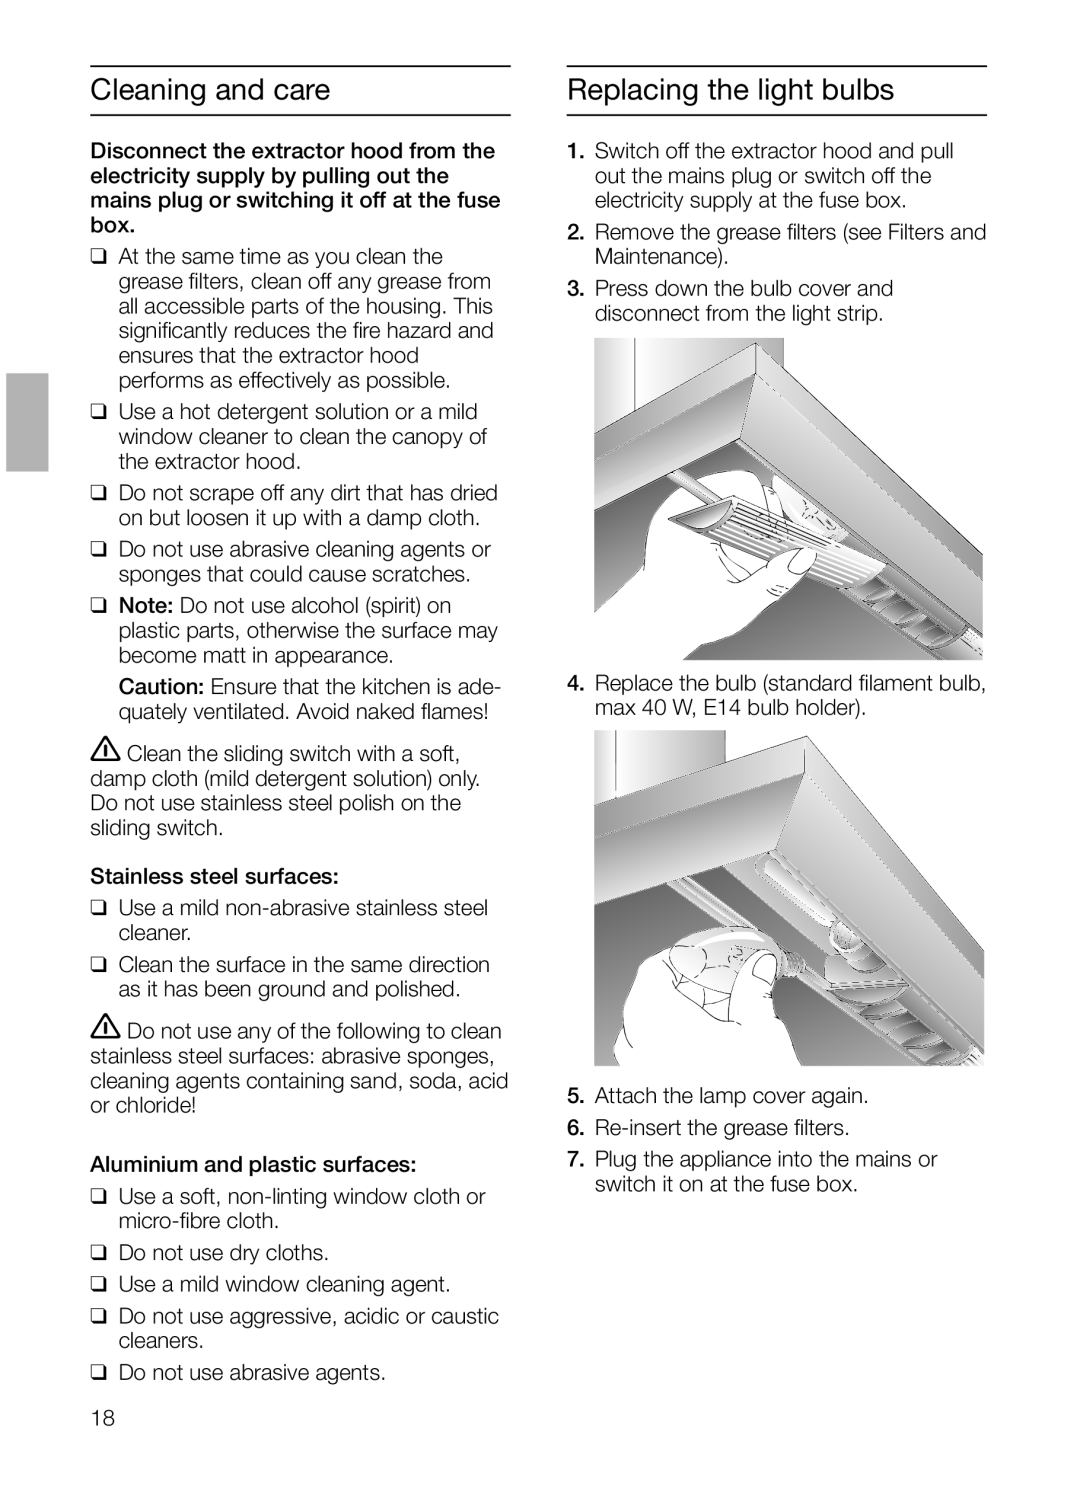 Bosch Appliances DKE 73, DKE 63 installation instructions Cleaning and care, Replacing the light bulbs 